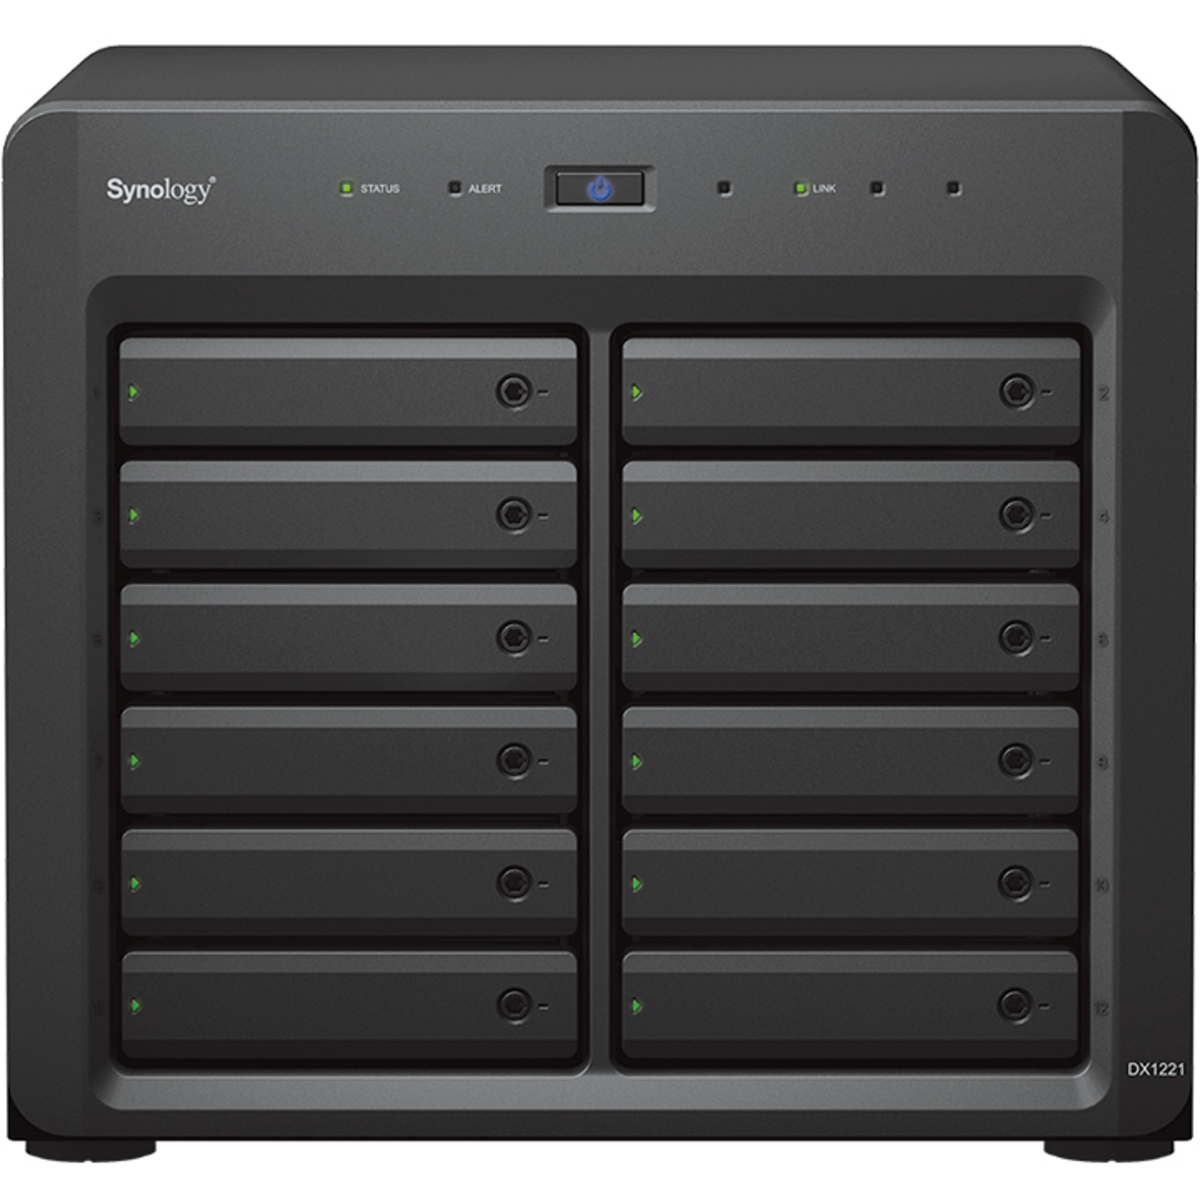 Synology DX1222 External Expansion Drive 28tb 12-Bay Desktop Multimedia / Power User / Business Expansion Enclosure 7x4tb Western Digital Red Pro WD4005FFBX 3.5 7200rpm SATA 6Gb/s HDD NAS Class Drives Installed - Burn-In Tested DX1222 External Expansion Drive